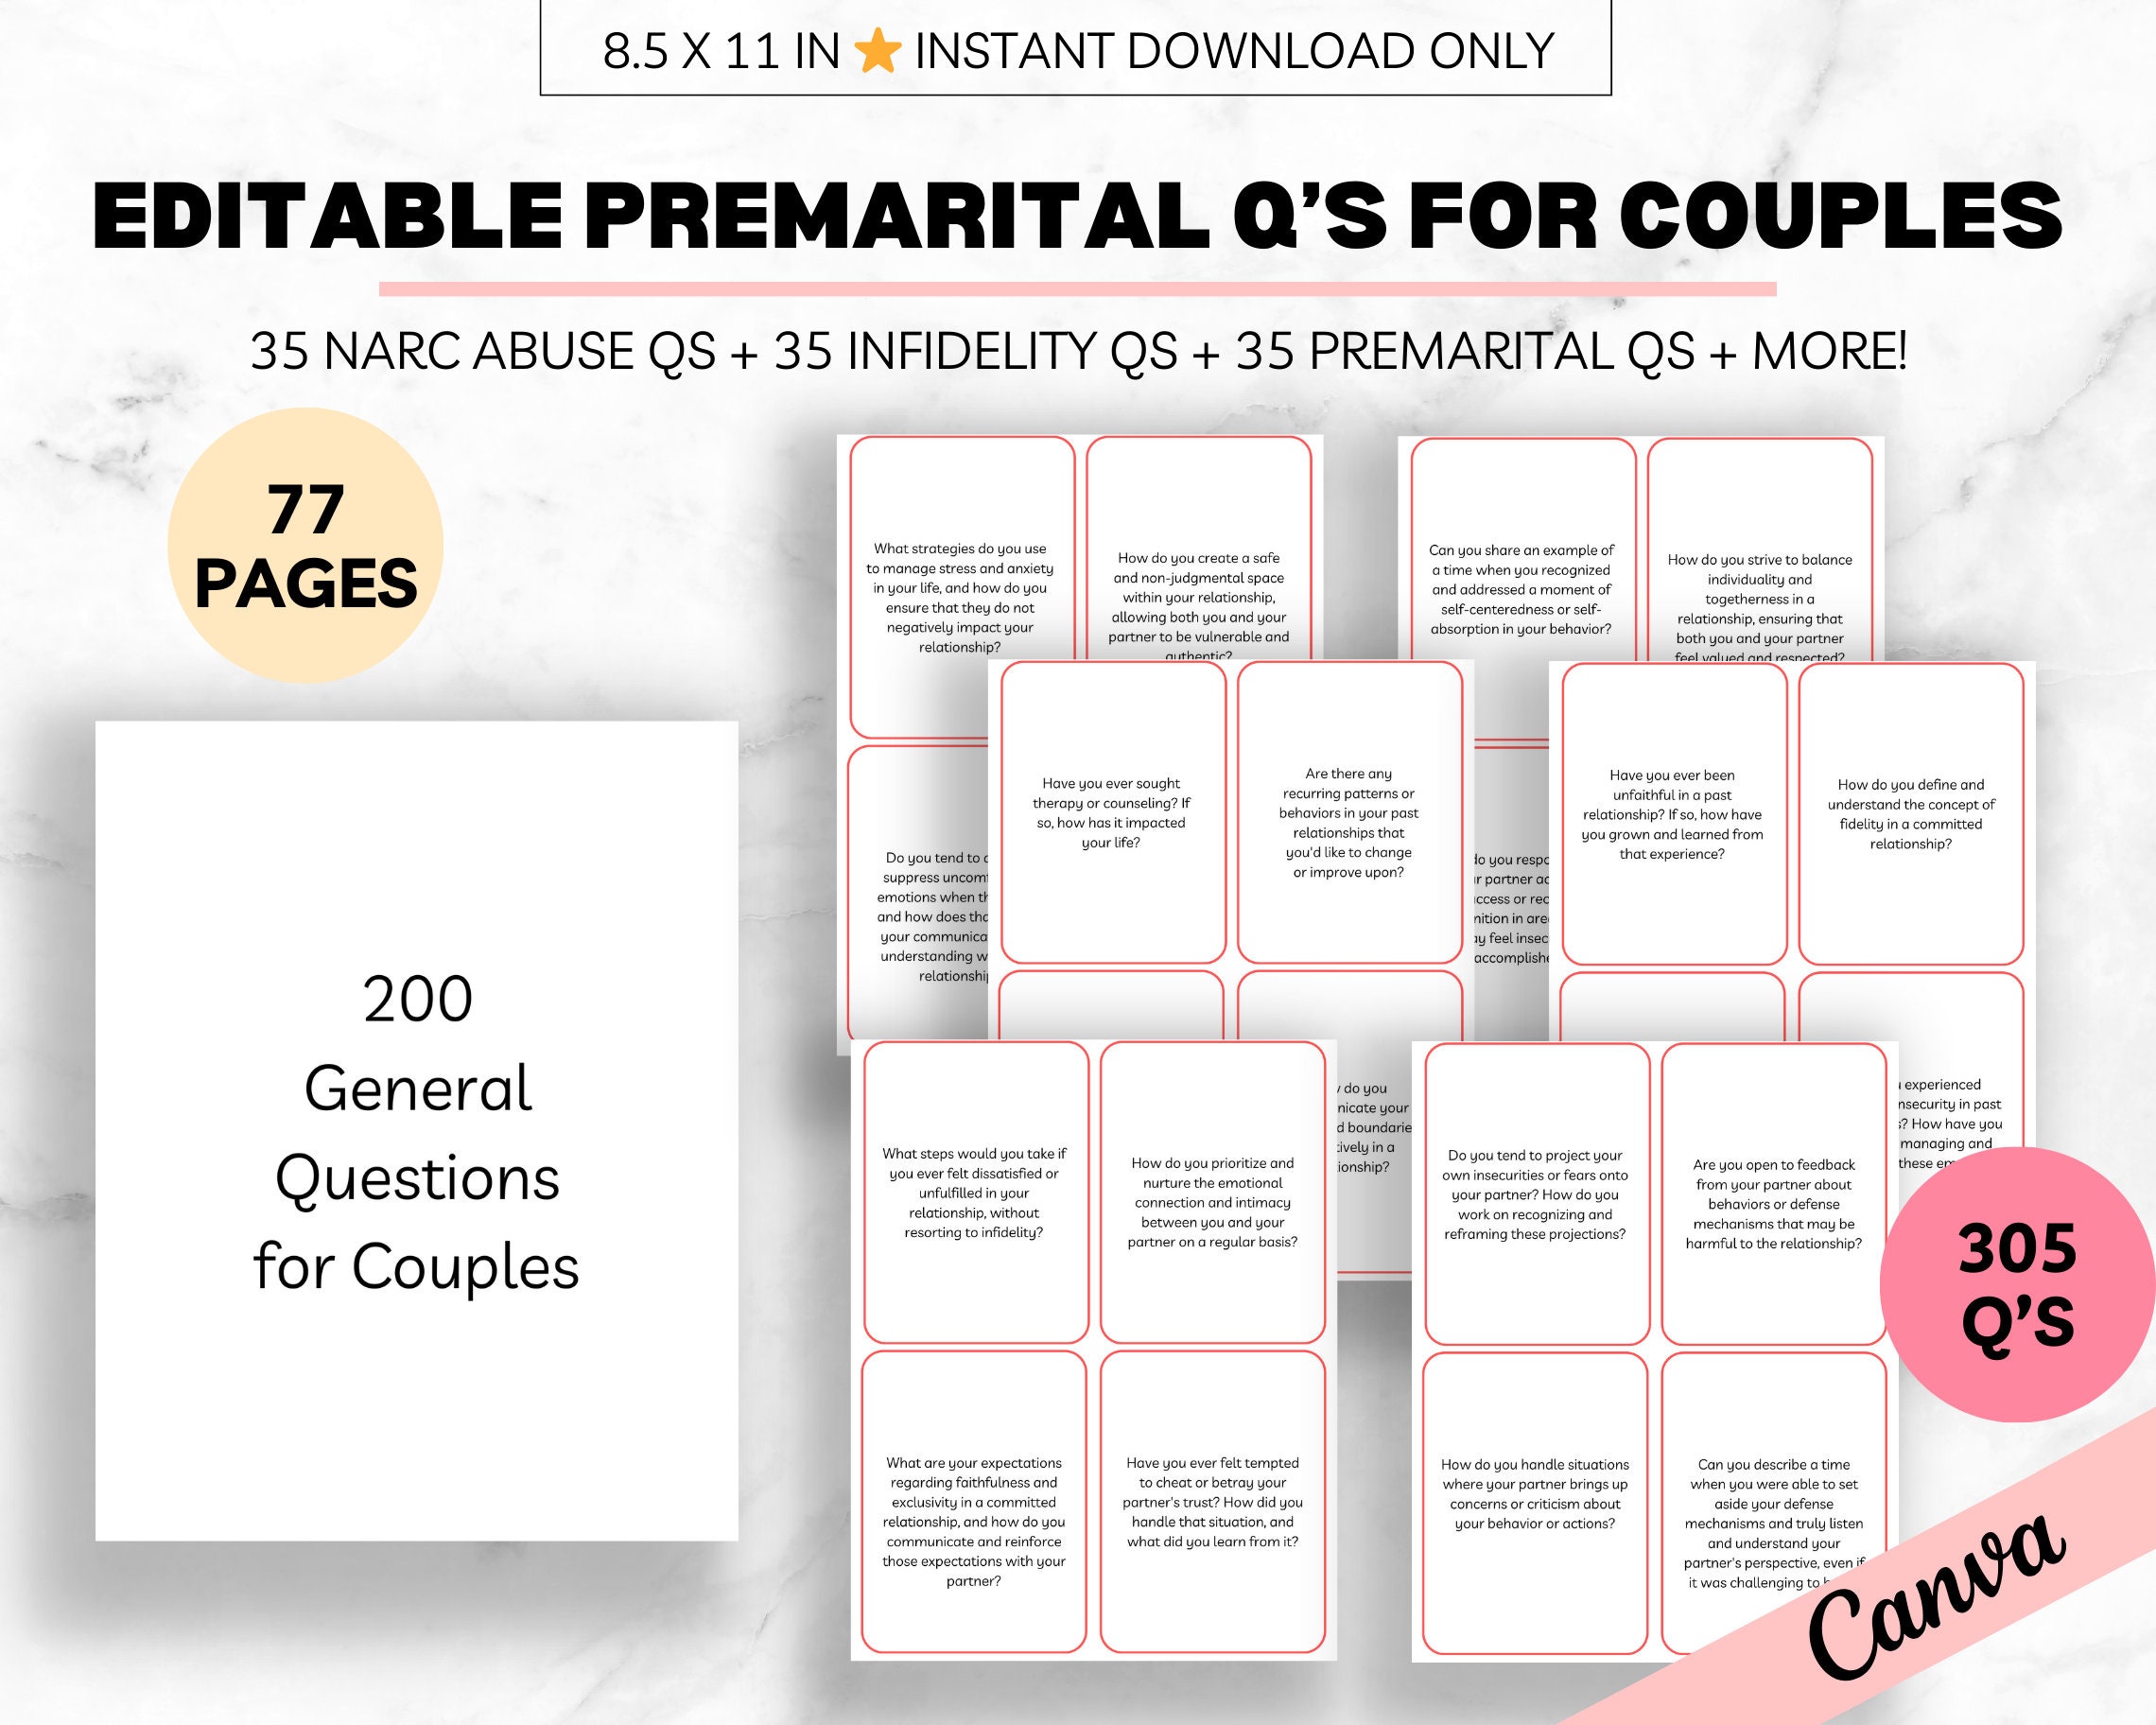 Couples Therapy Journal: Couples Counseling, Marriage, Engaged, Love,  Breakup, Relationship, Newlywed, Fiance, Premarital, Canva Editable  Templates, Kdp interior, by KDPinterior.com